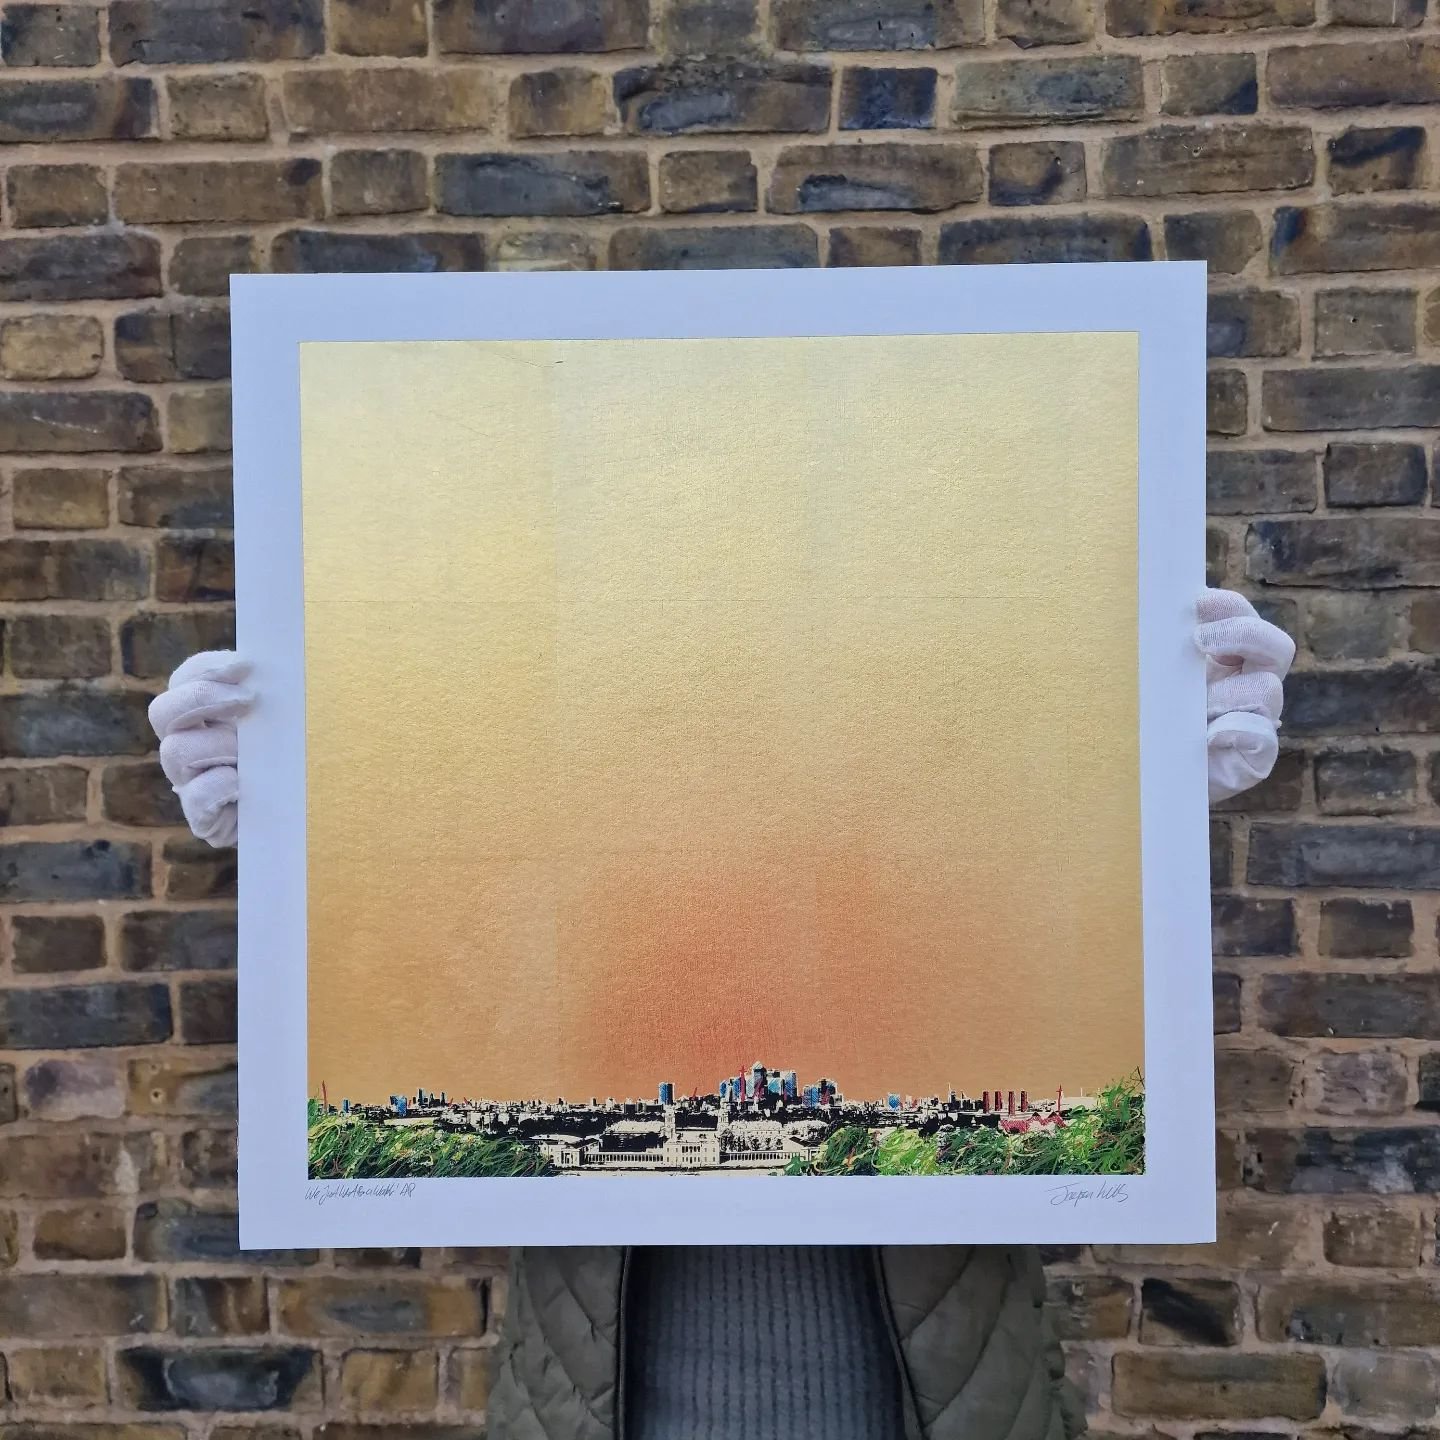 @xennial_gallery 

&quot;We just went for a walk .&quot;

Artist proof with certificate, by artist @jaysonlilley 

Print paper size 500 x 500mm.

#xennialgallery #bexleyvillage #londongallery #artcollection #limitededitionprints #artcollector #artoni